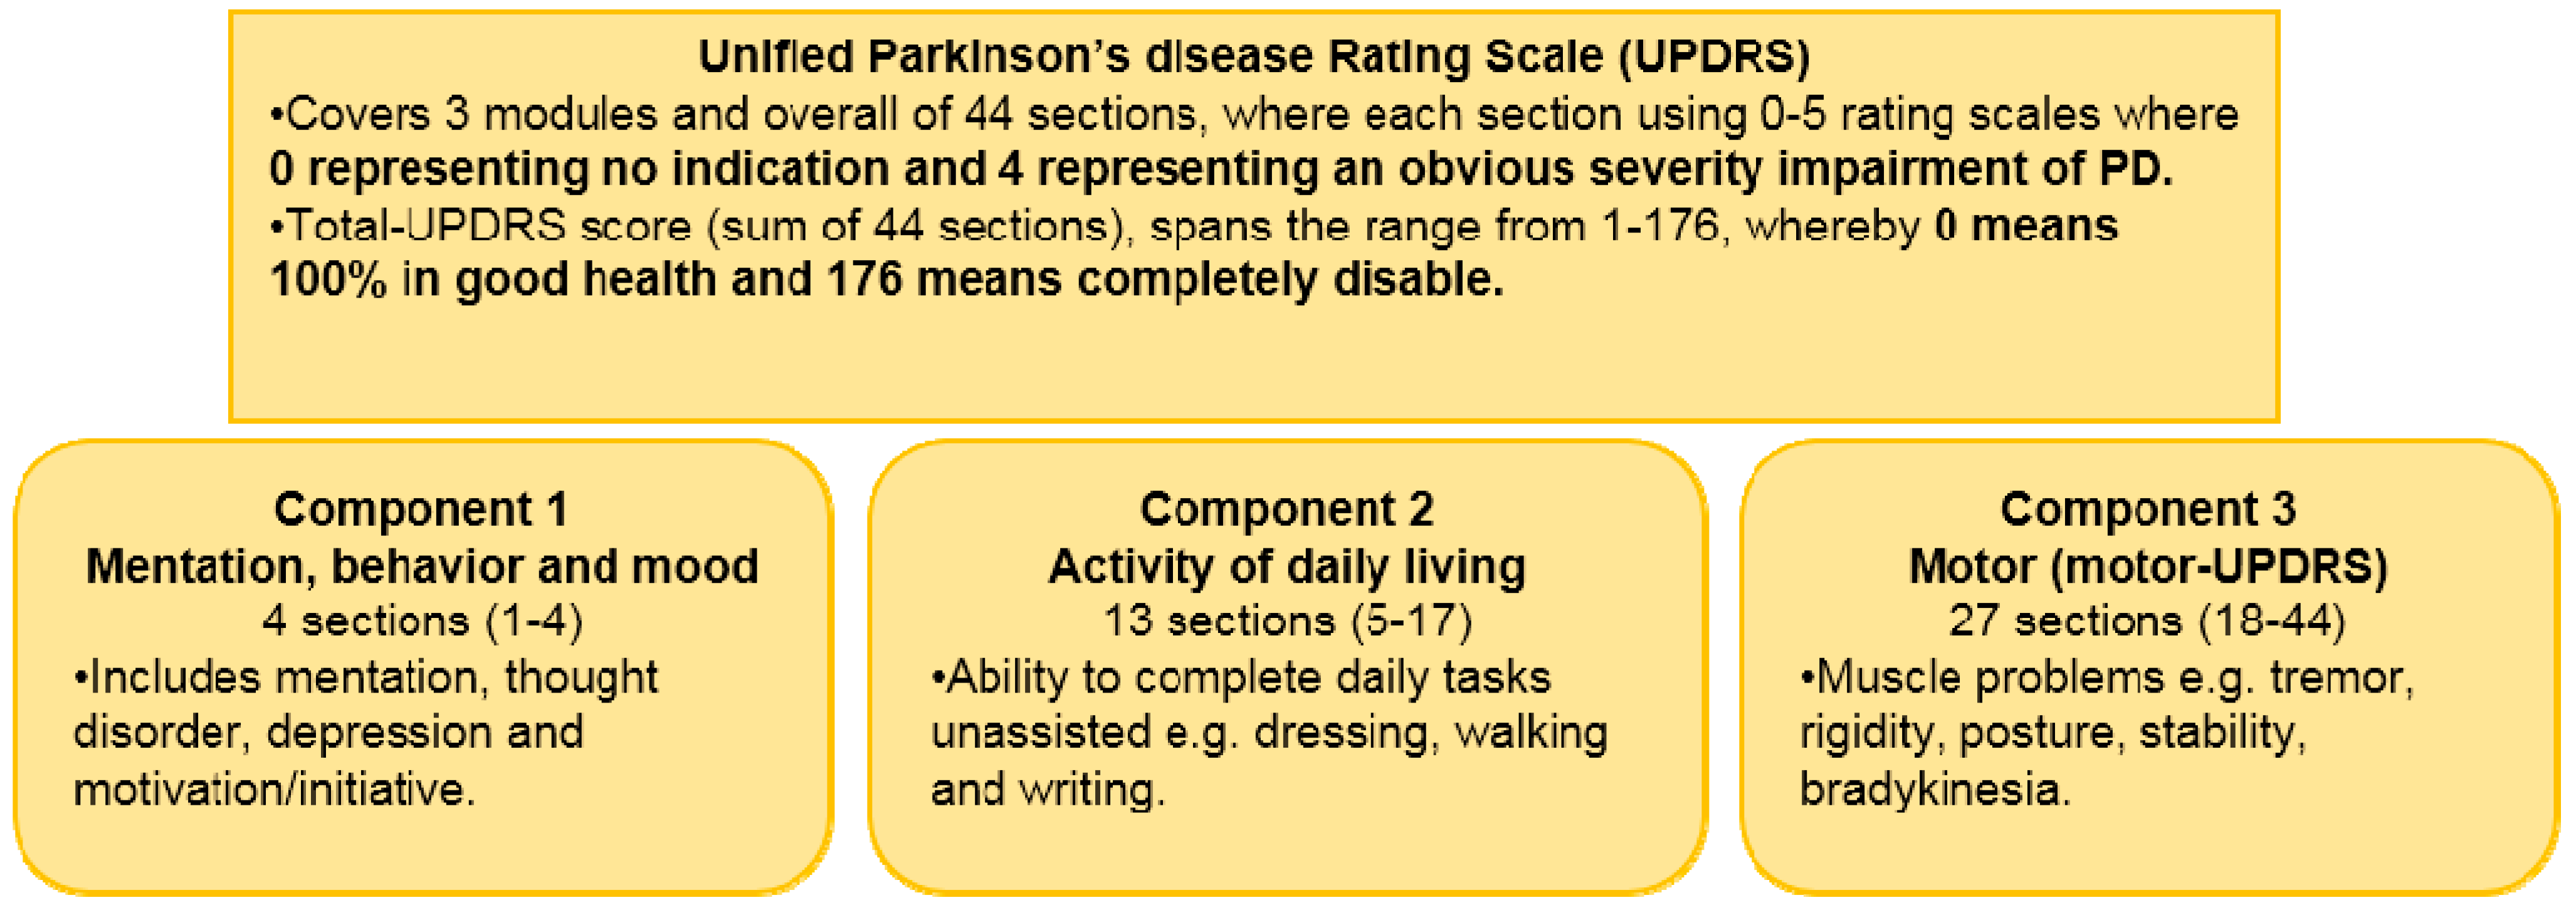 how many different types of parkinsons disease are there